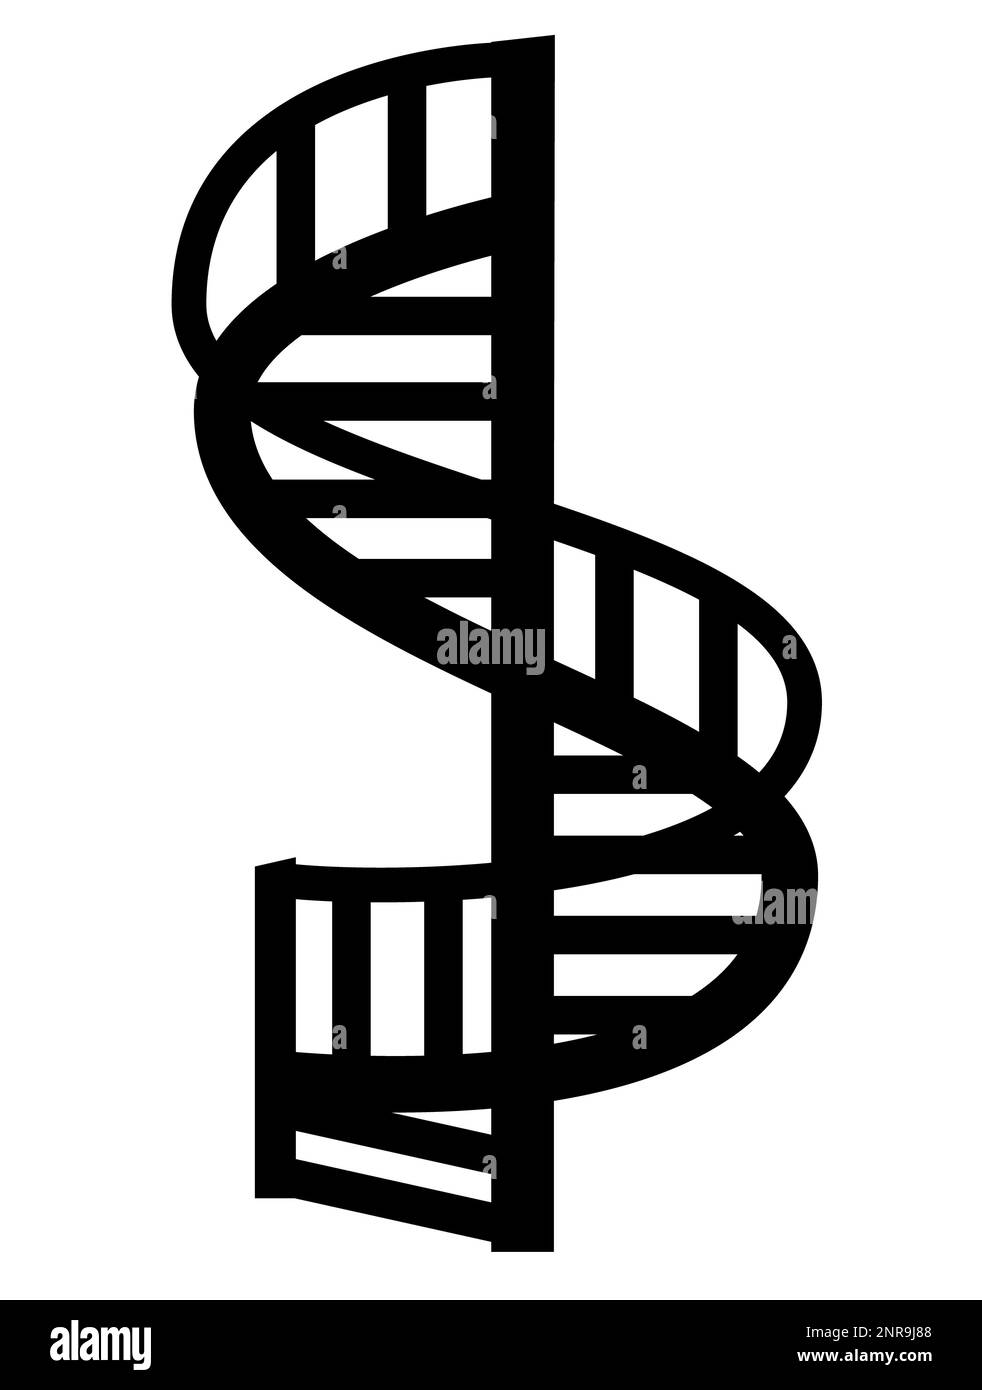 Circular staircase icon on white background. Spiral Staircase sign. circular staircase with black handrail symbol. flat style. Stock Photo